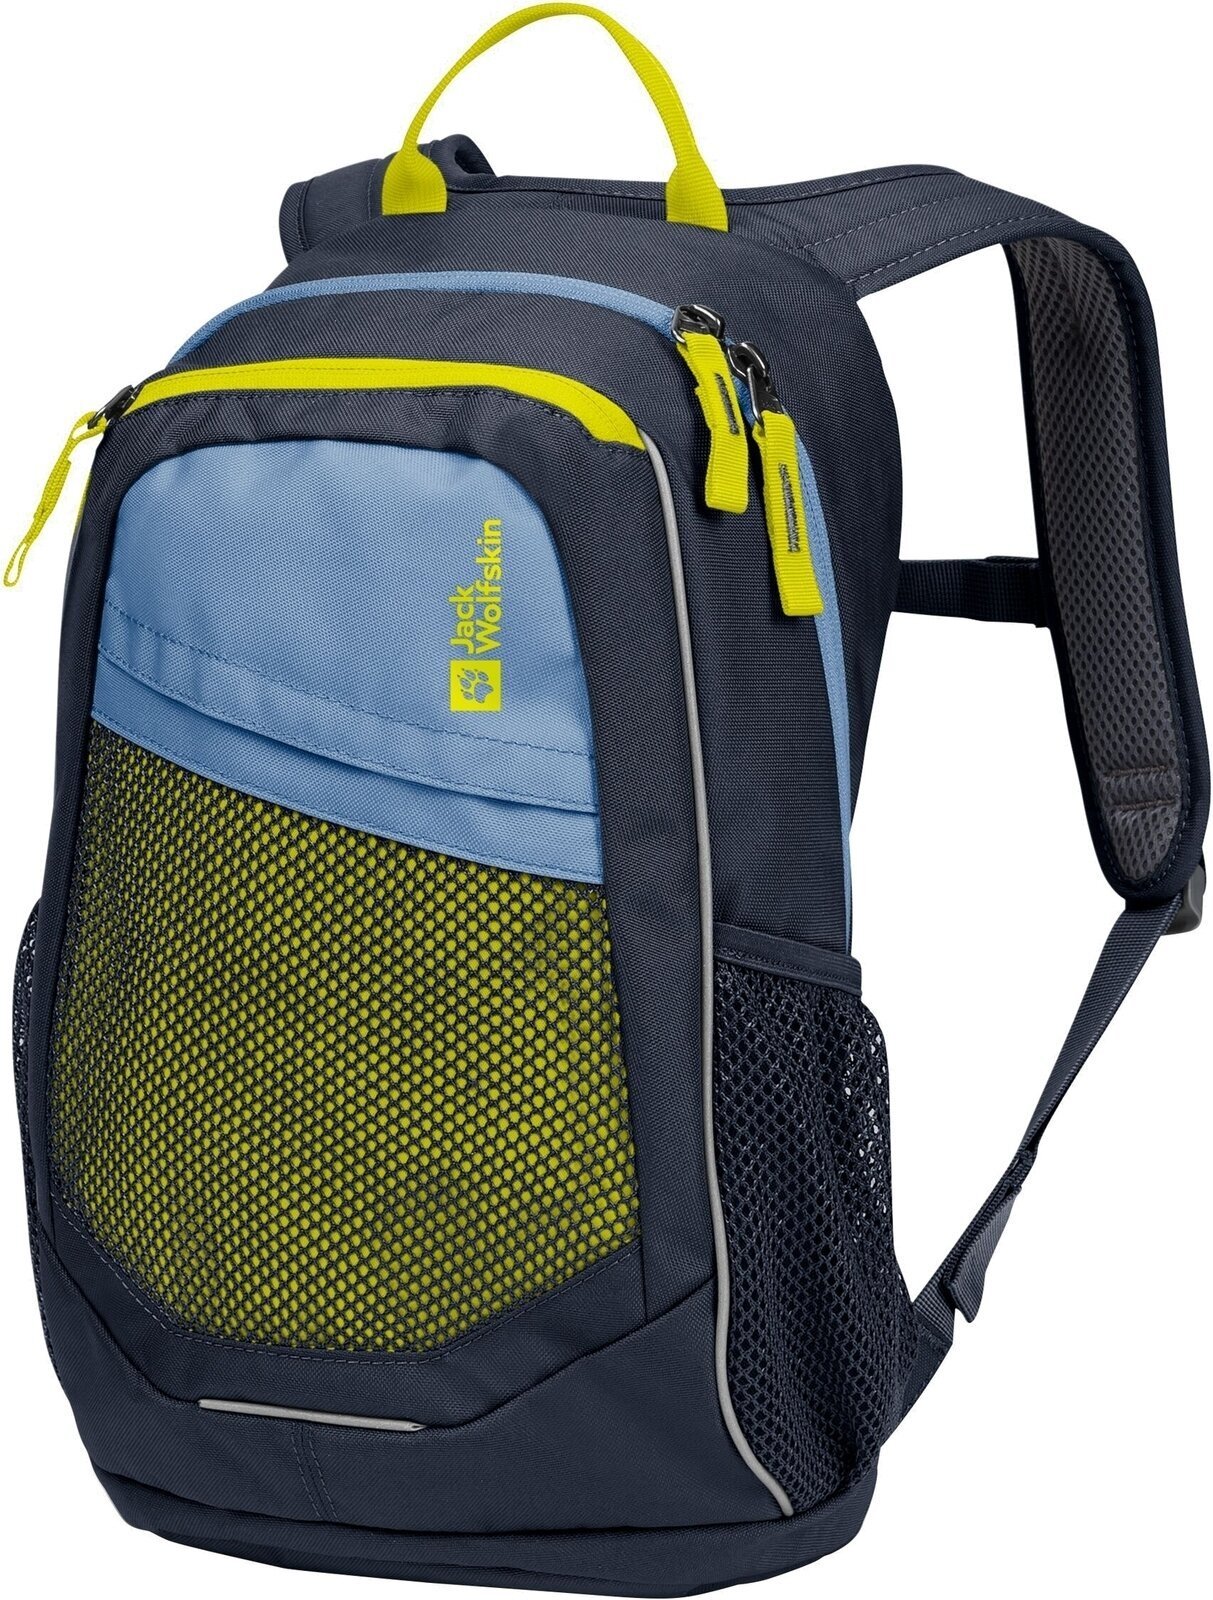 Outdoor Sac à dos Jack Wolfskin Track Jack Night Blue Une seule taille Outdoor Sac à dos